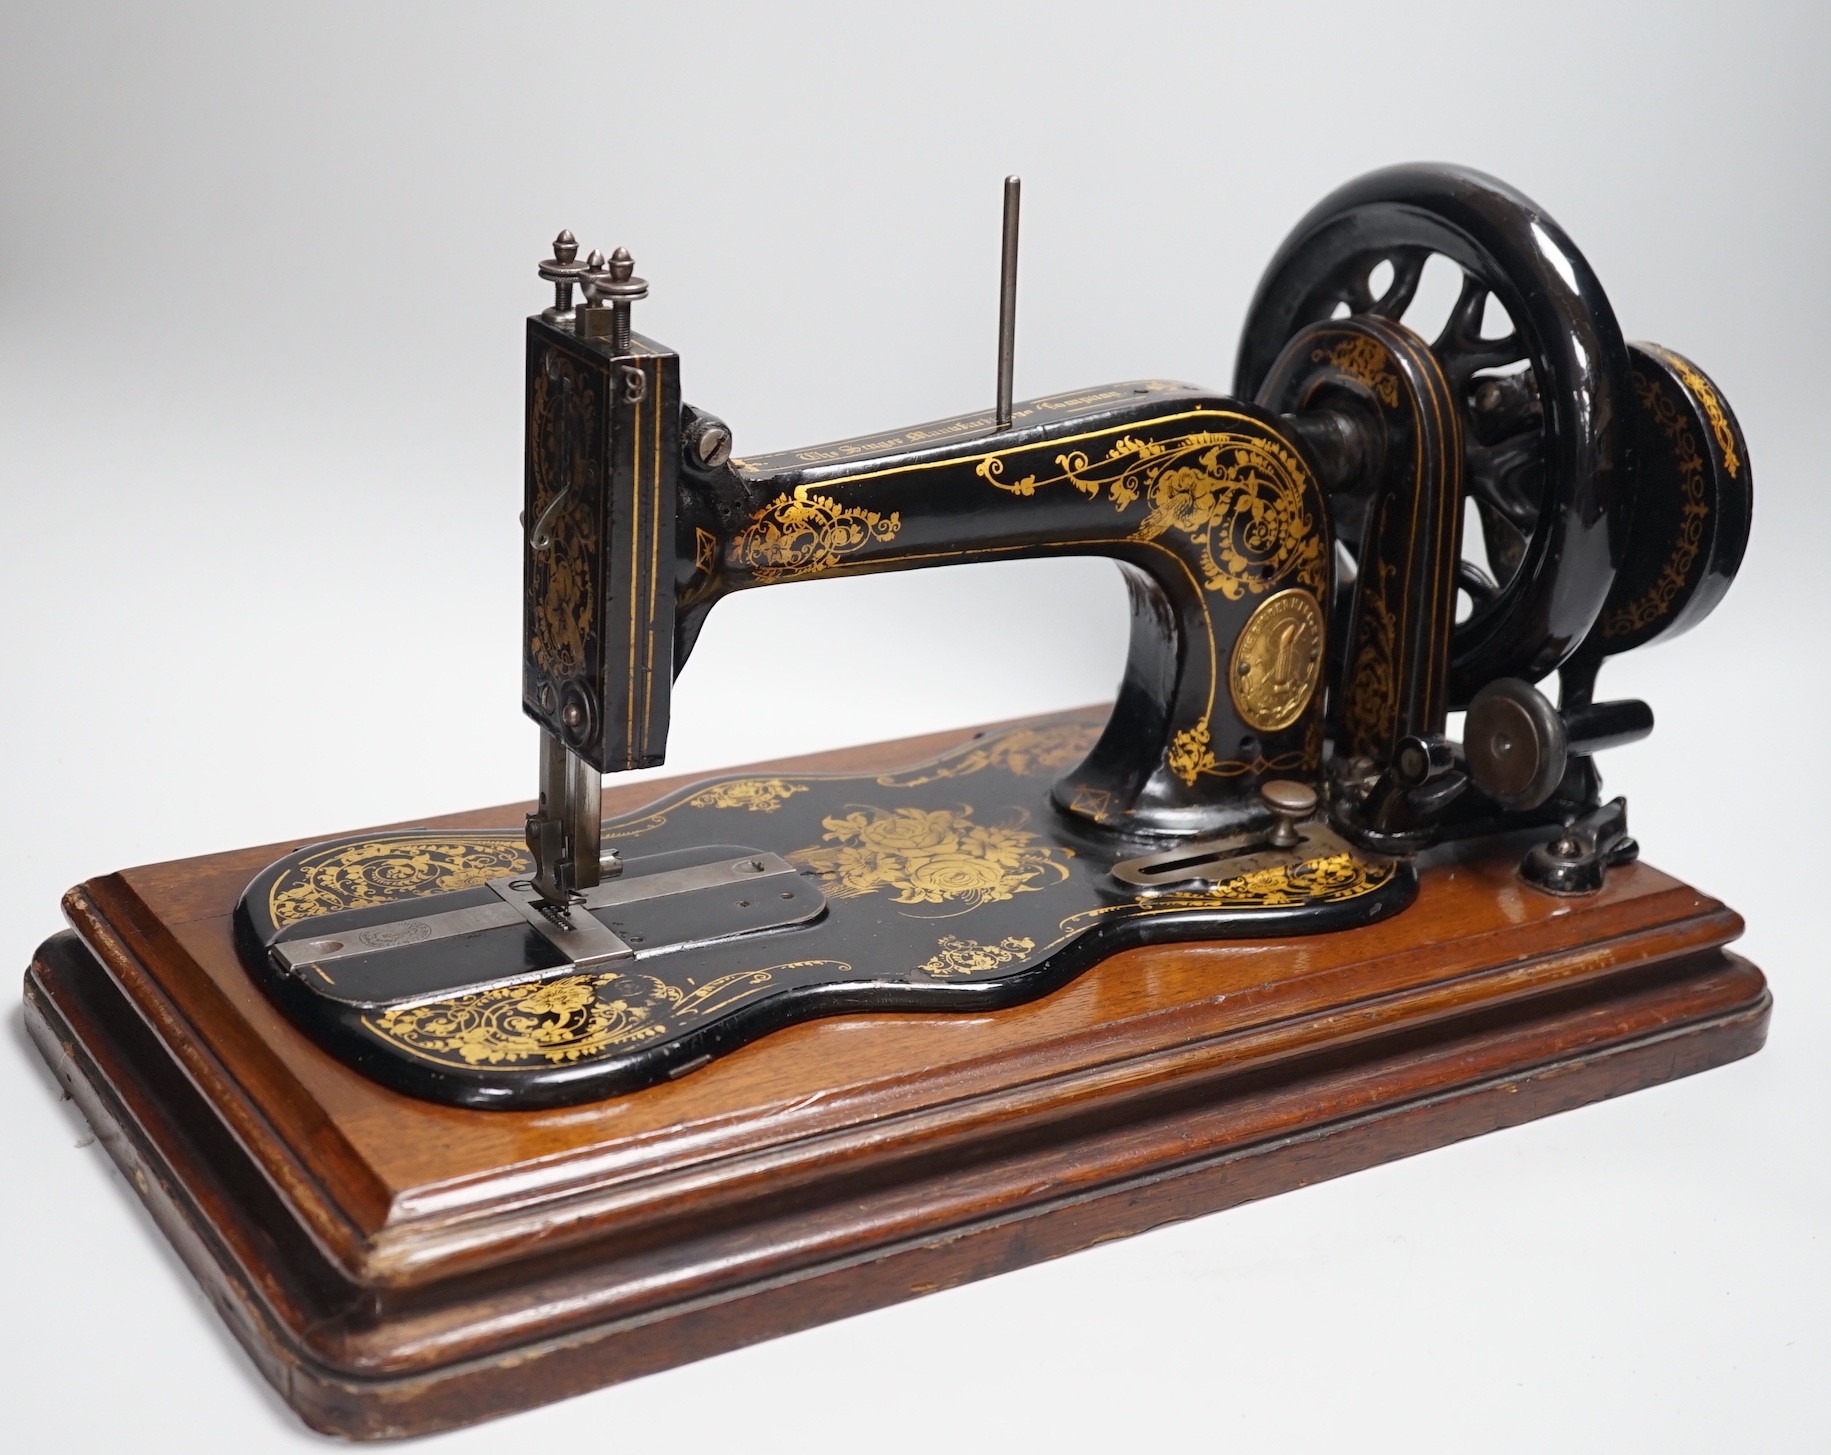 A walnut-cased 19th century Singer sewing machine, Serial Number 2831786 600986